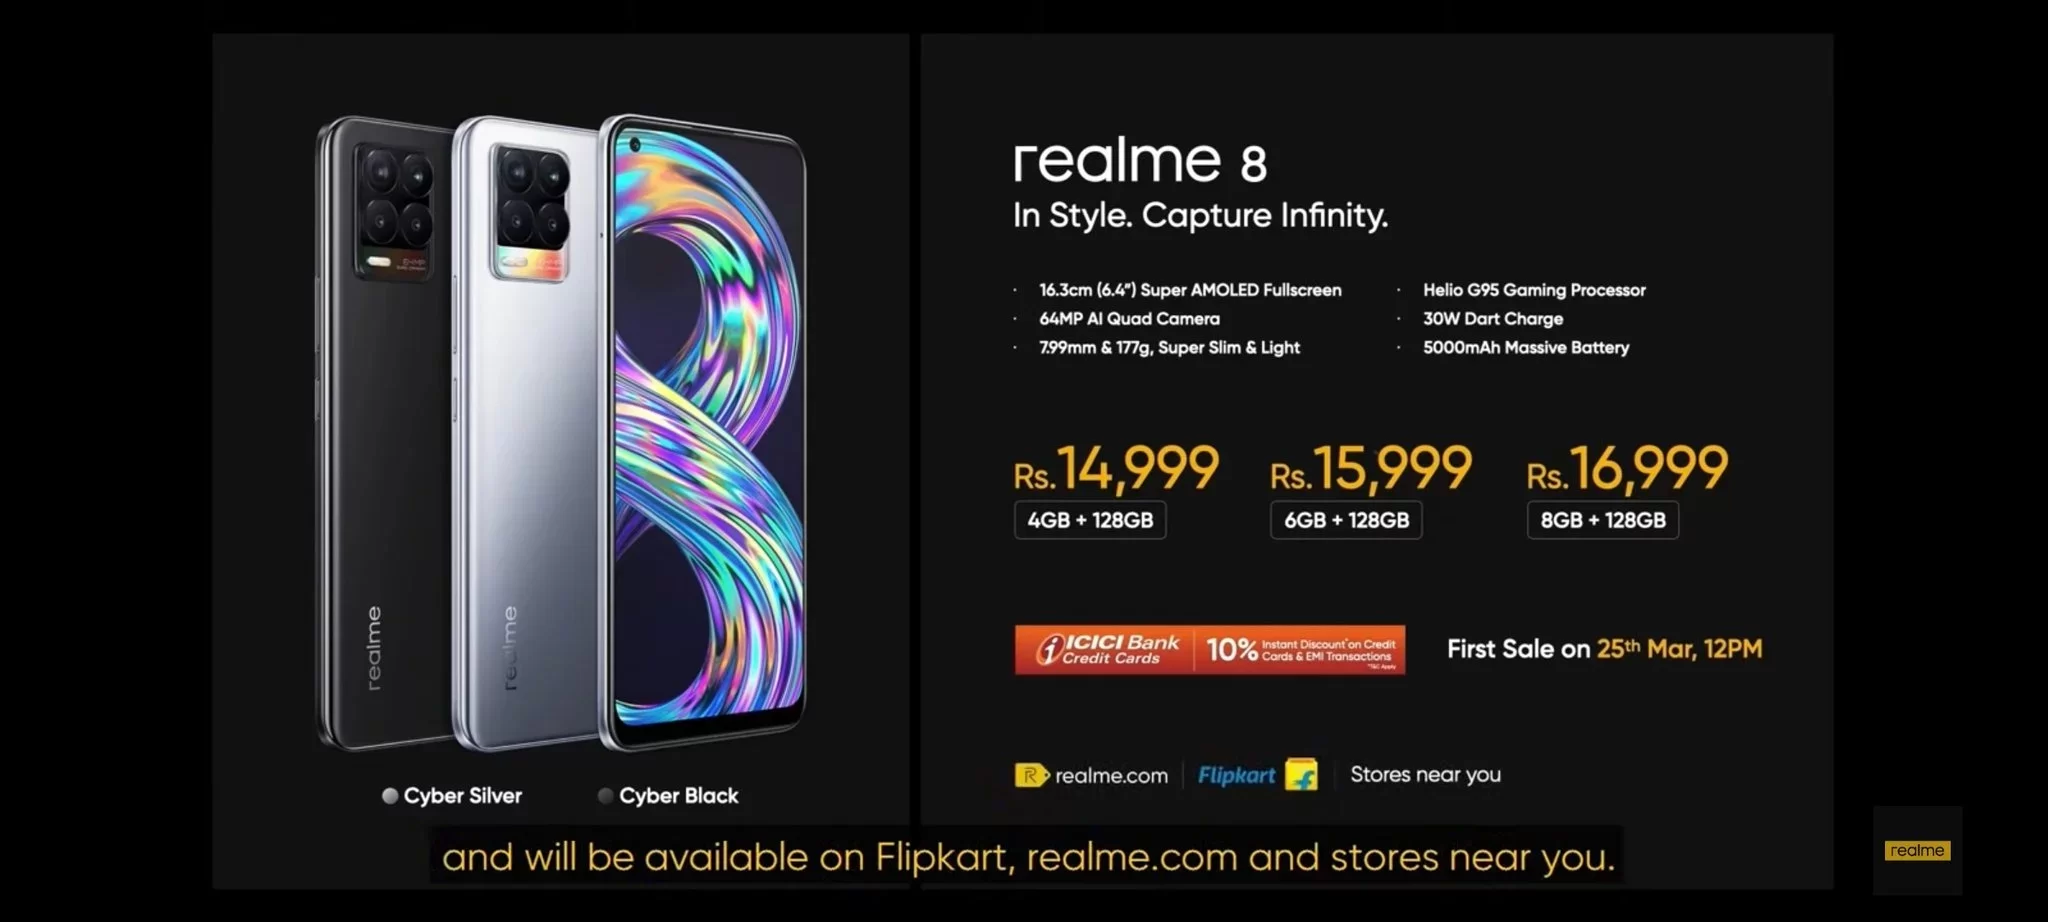 Realme 8 with Super AMOLED display, 64MP quad rear camera launched: Price, Specifications